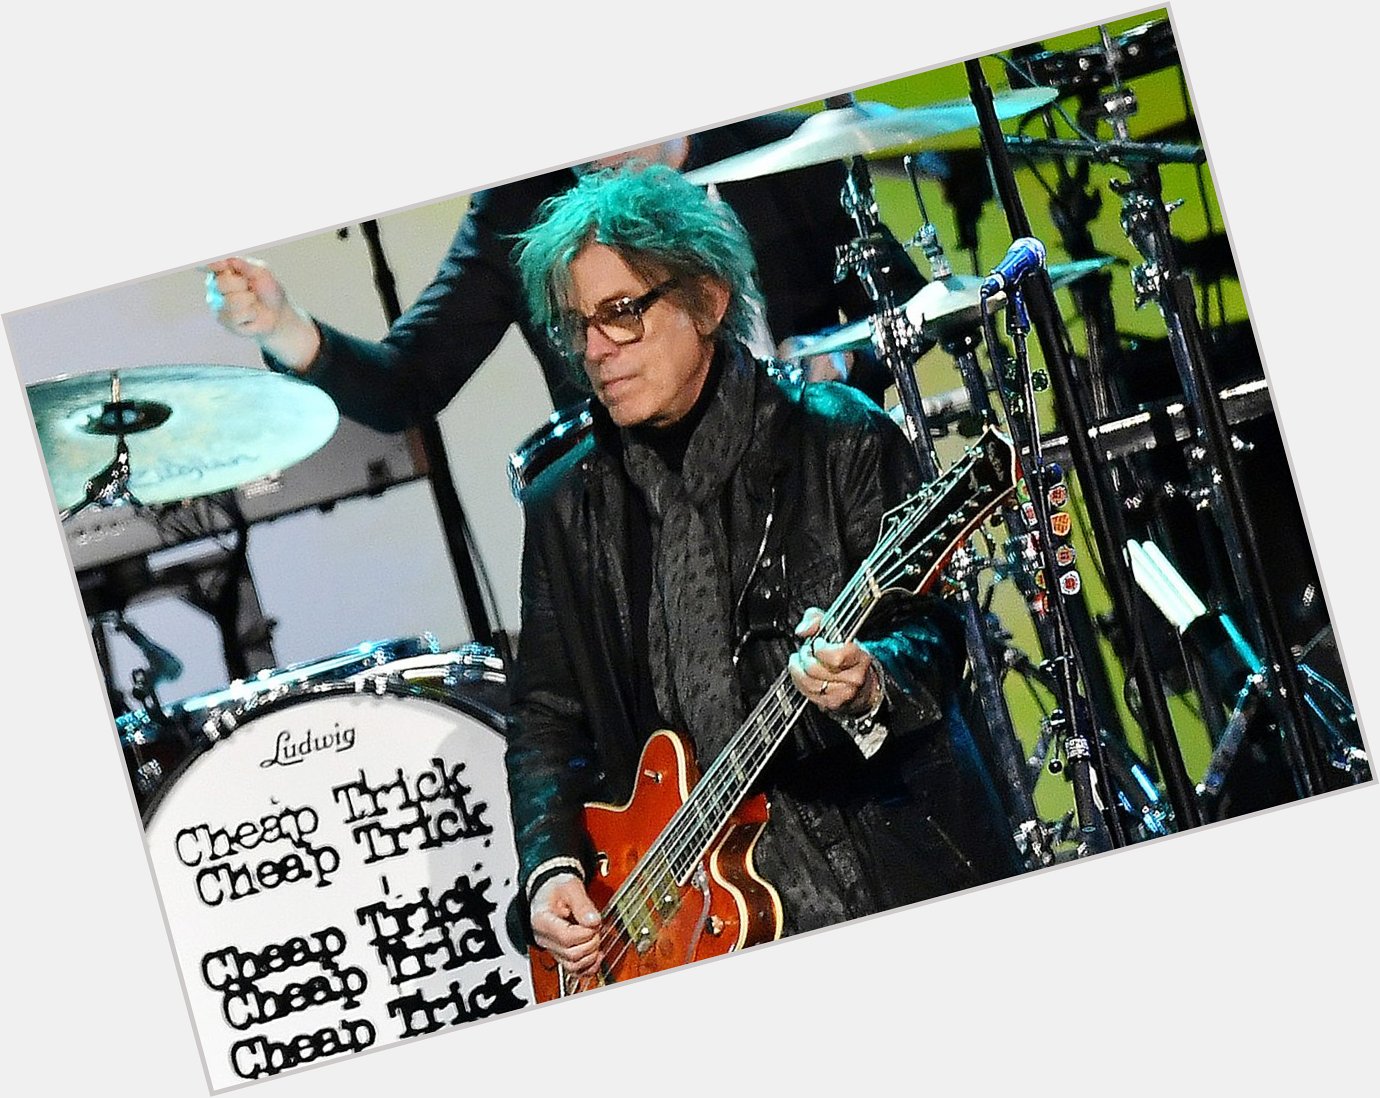  in 1950, Cheap Trick bassist Tom Petersson was born in Rockford, Illinois. Happy birthday, Tom! 